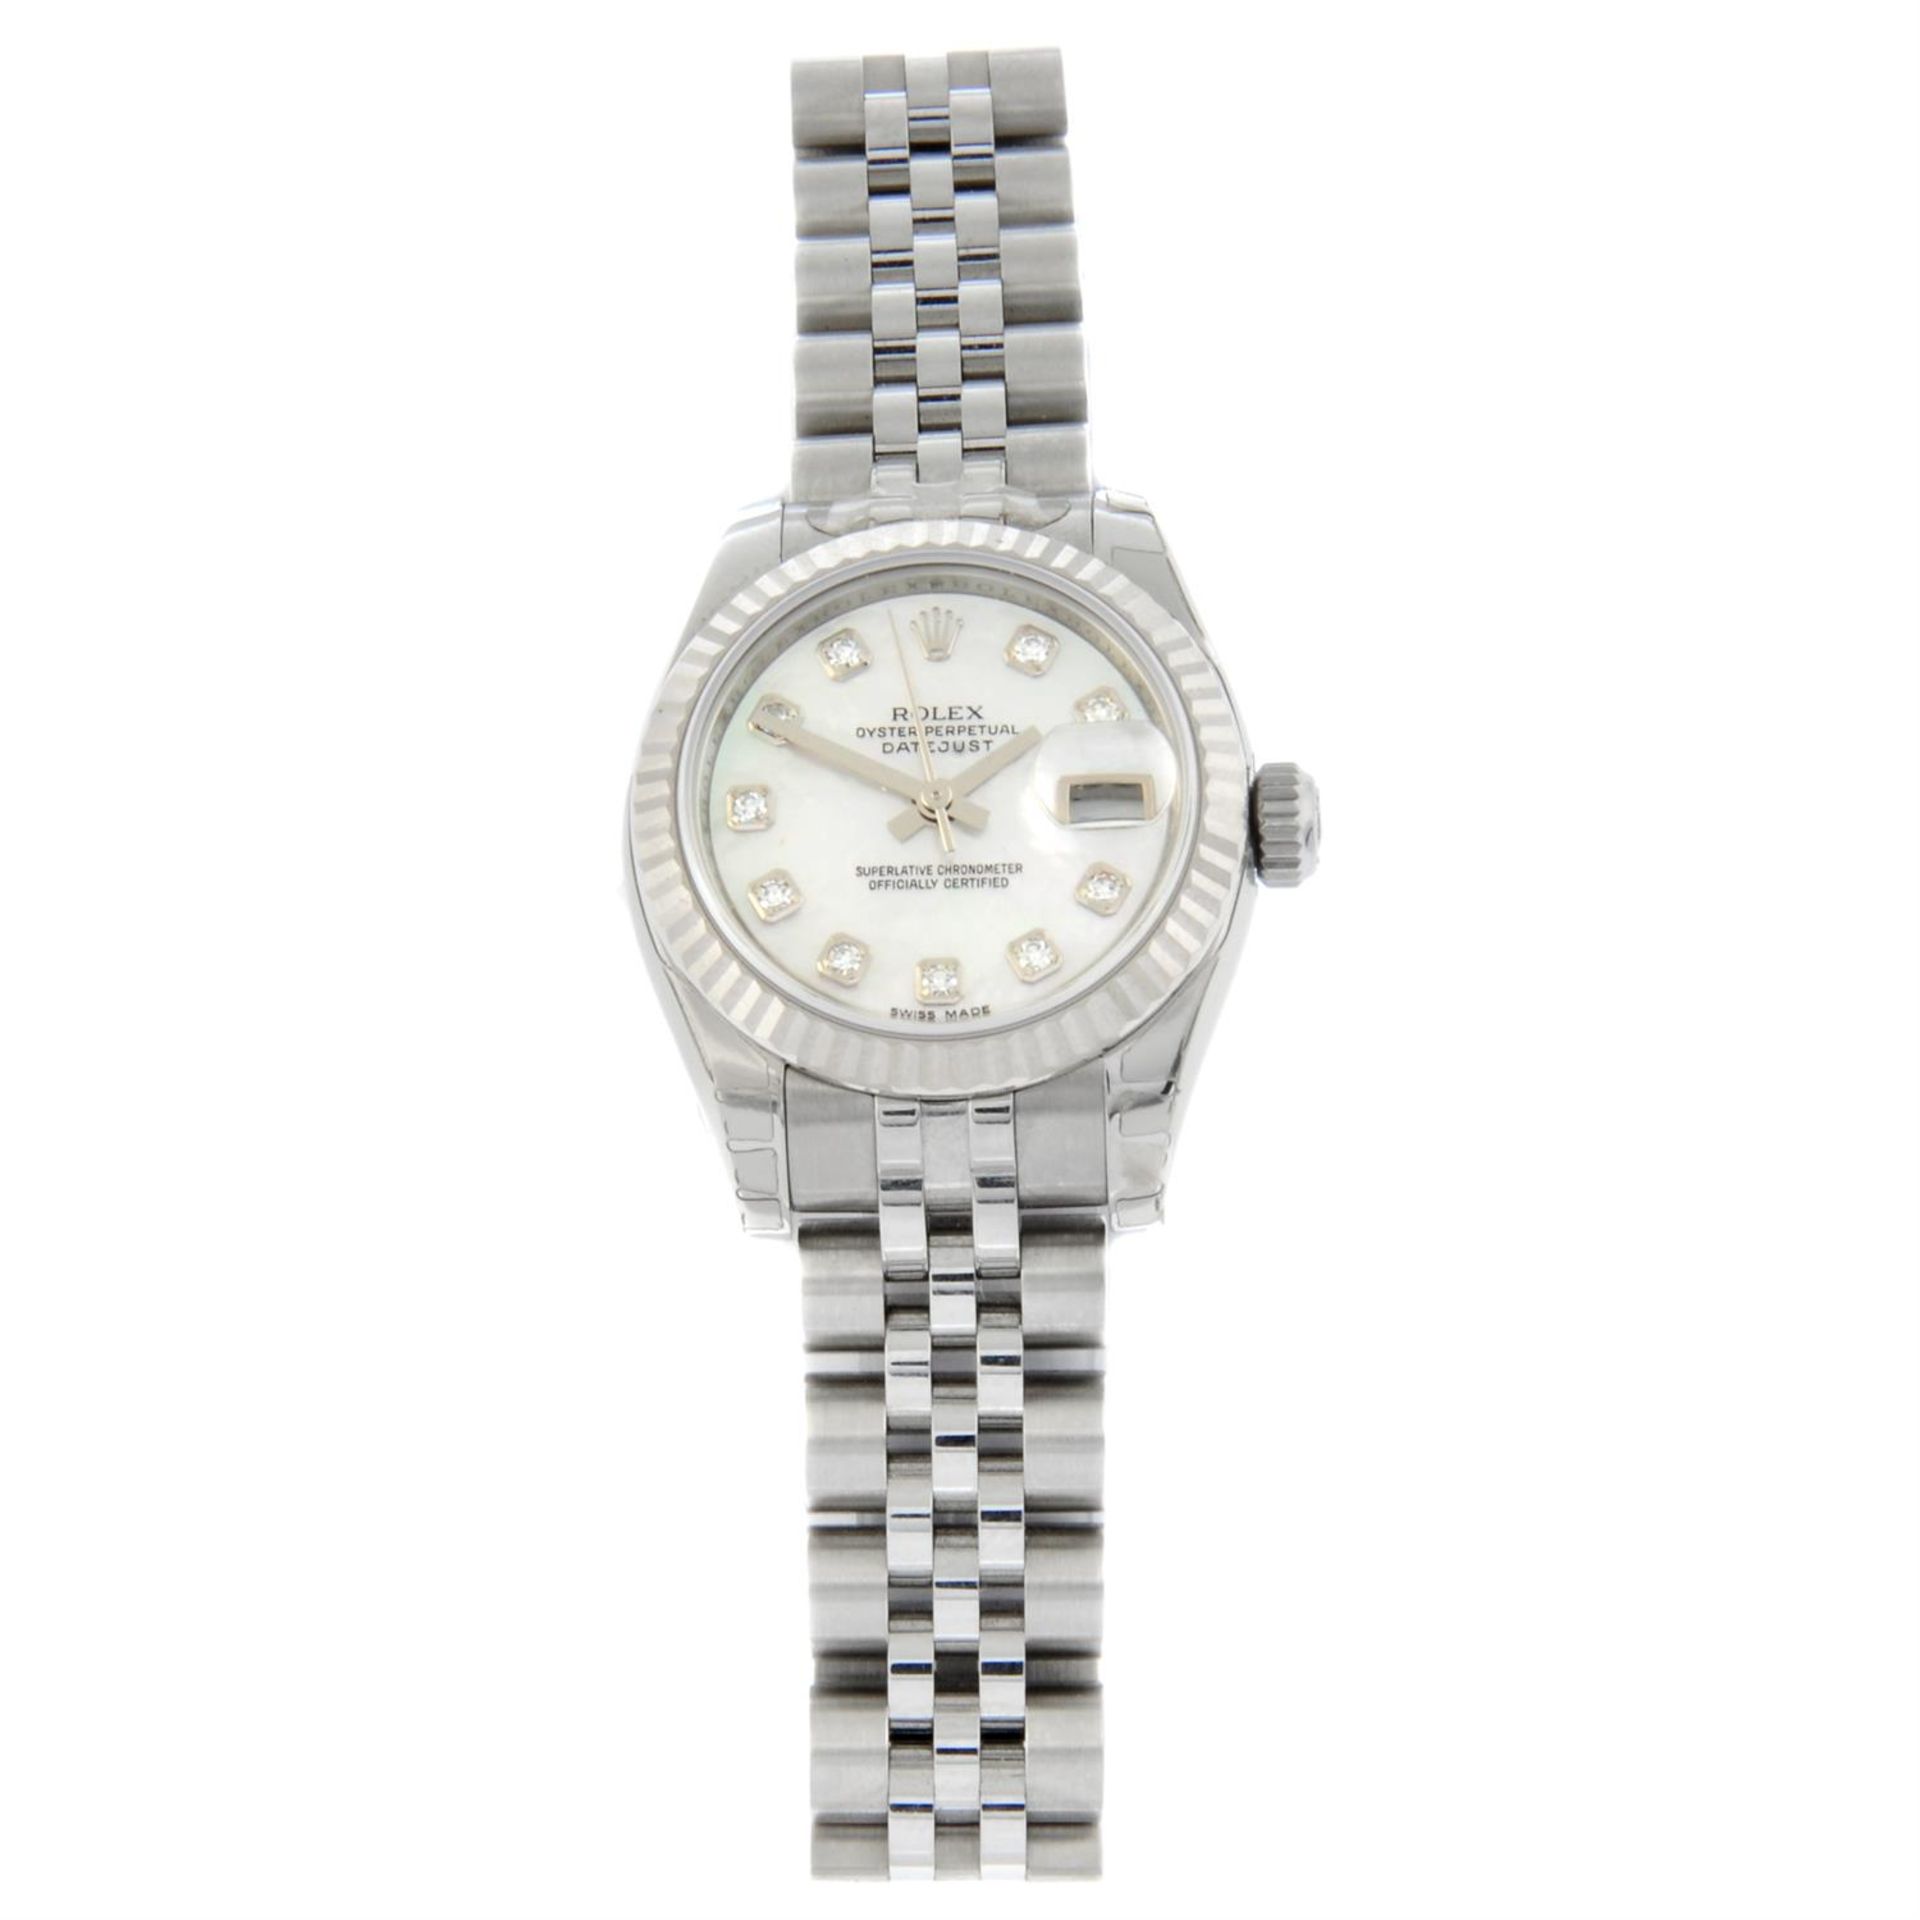 Rolex - an Oyster Perpetual Datejust watch, 26mm.